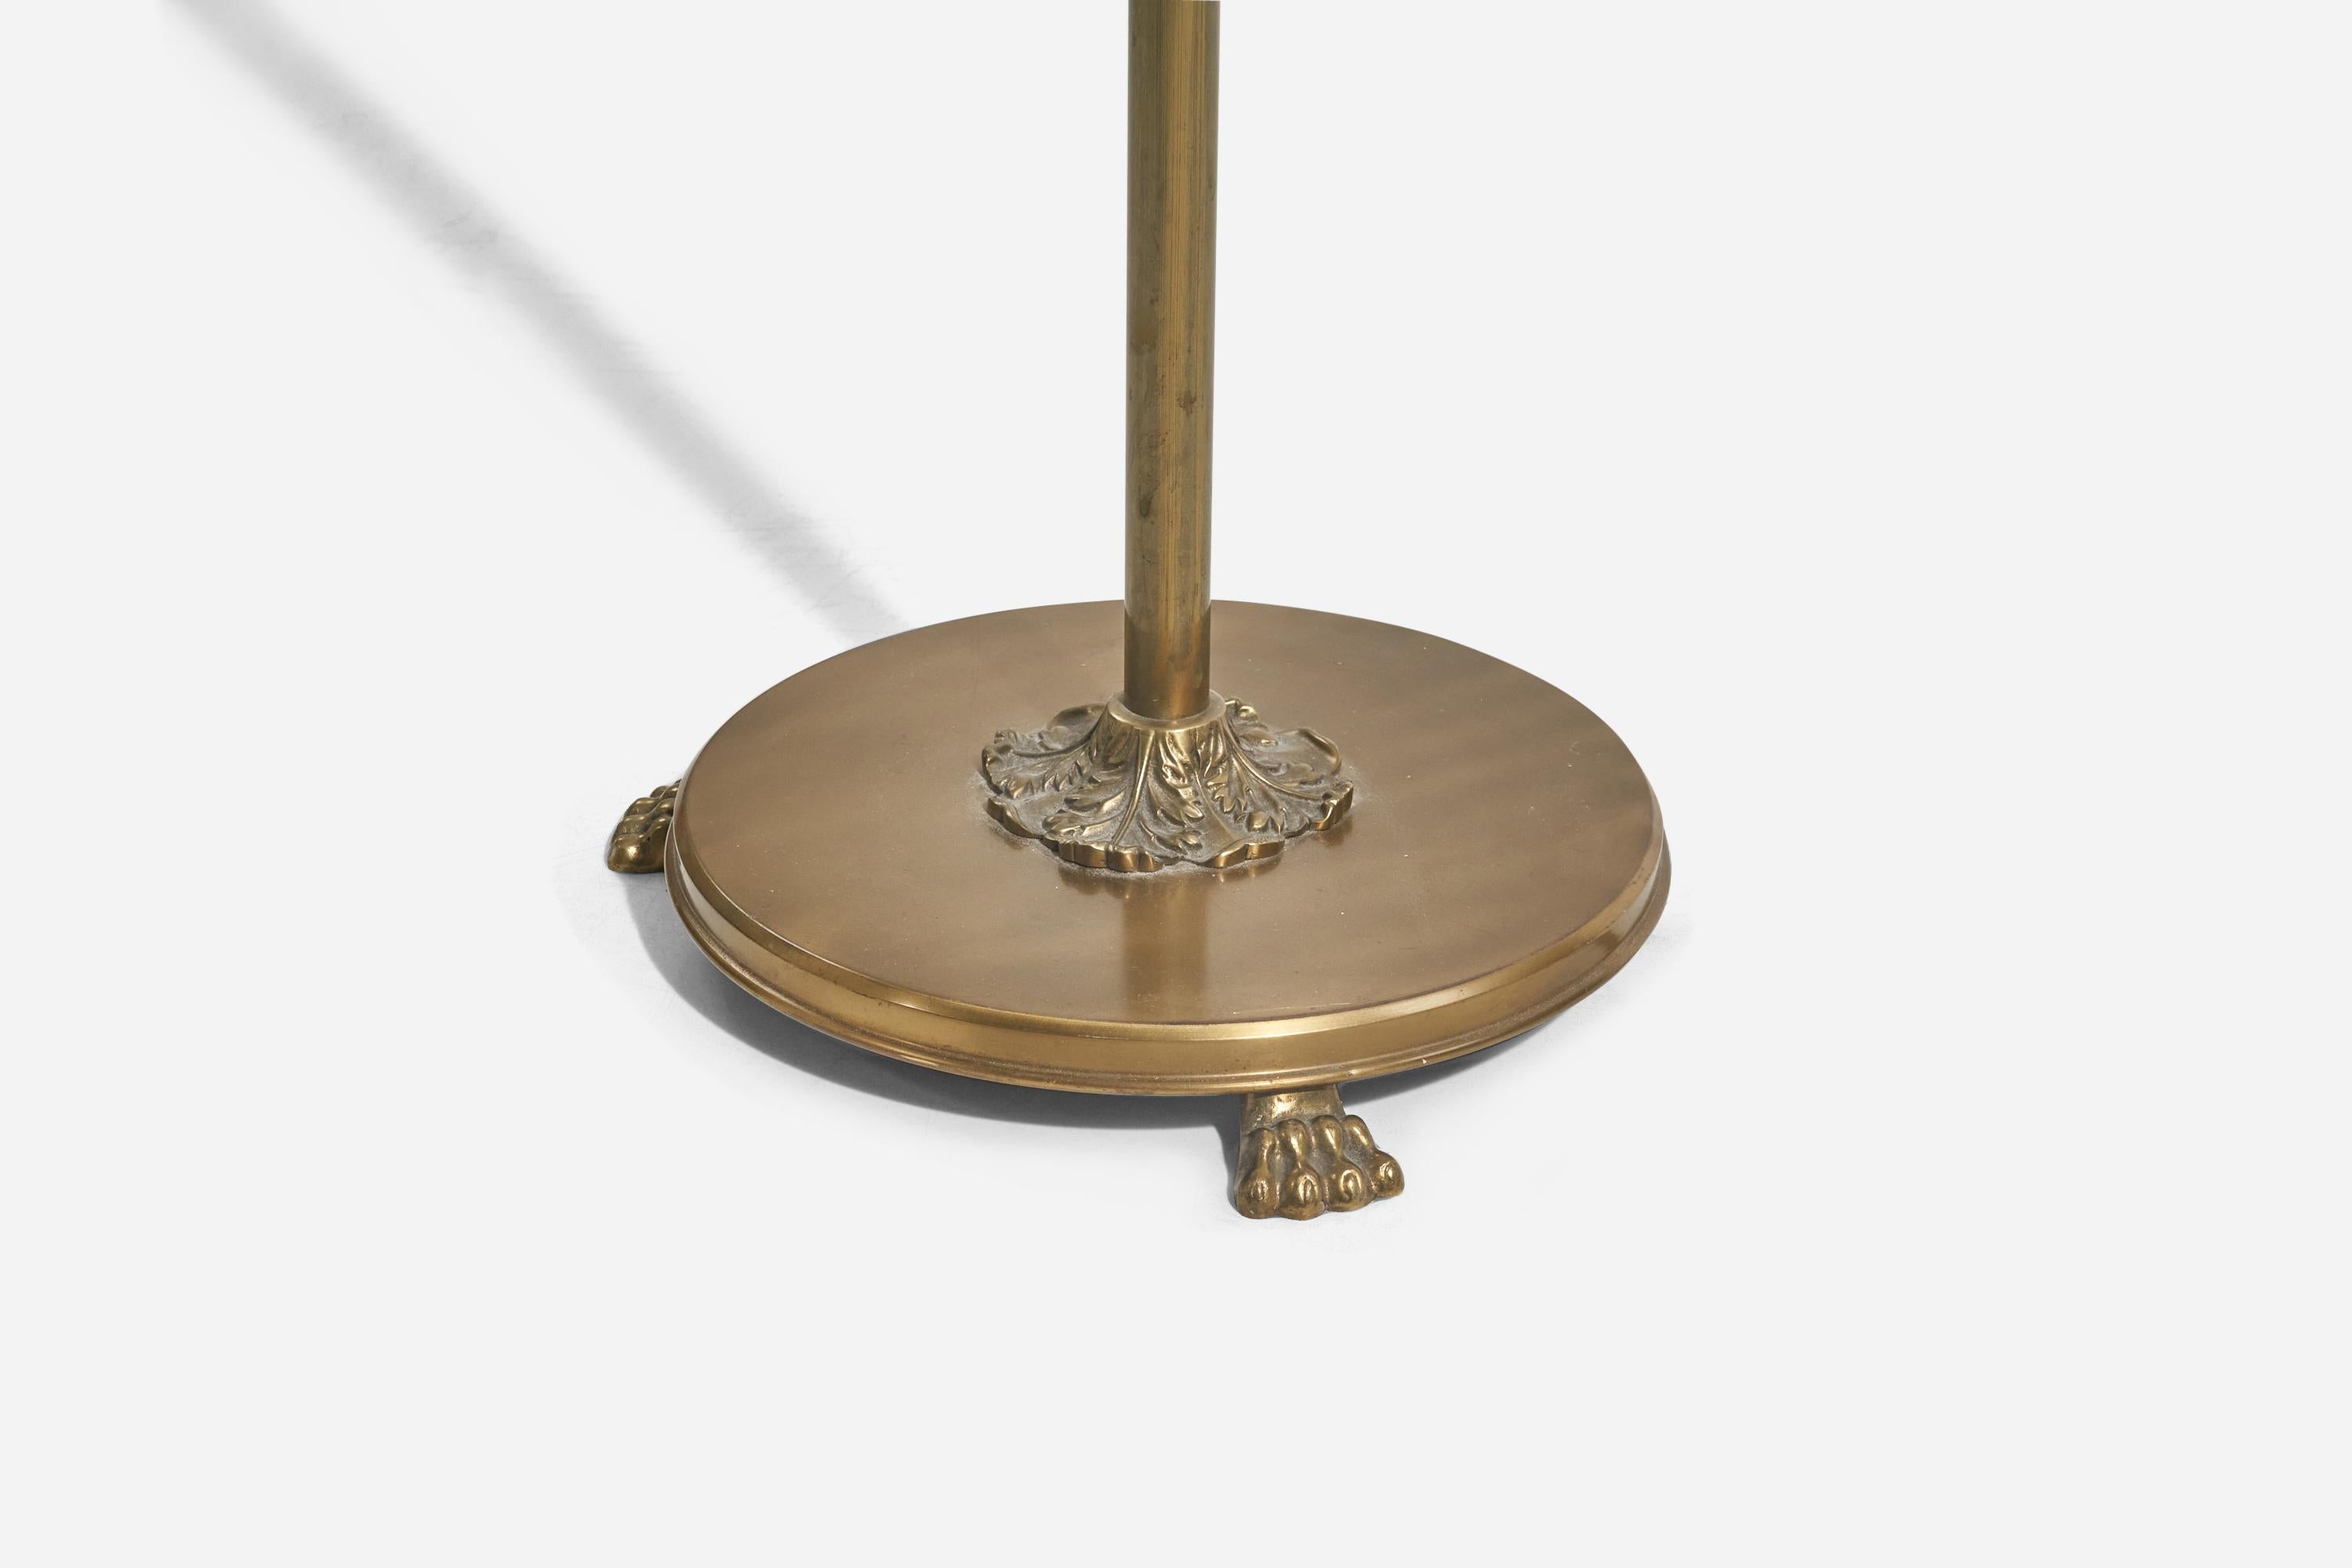 A brass and rattan floor lamp designed and produced by a Swedish designer, Sweden, 1940s. 

Dimensions variable, measured as illustrated in first image.

Sold with Lampshade(s). Dimensions stated are of Floor Lamp with Shade(s). 

Socket takes